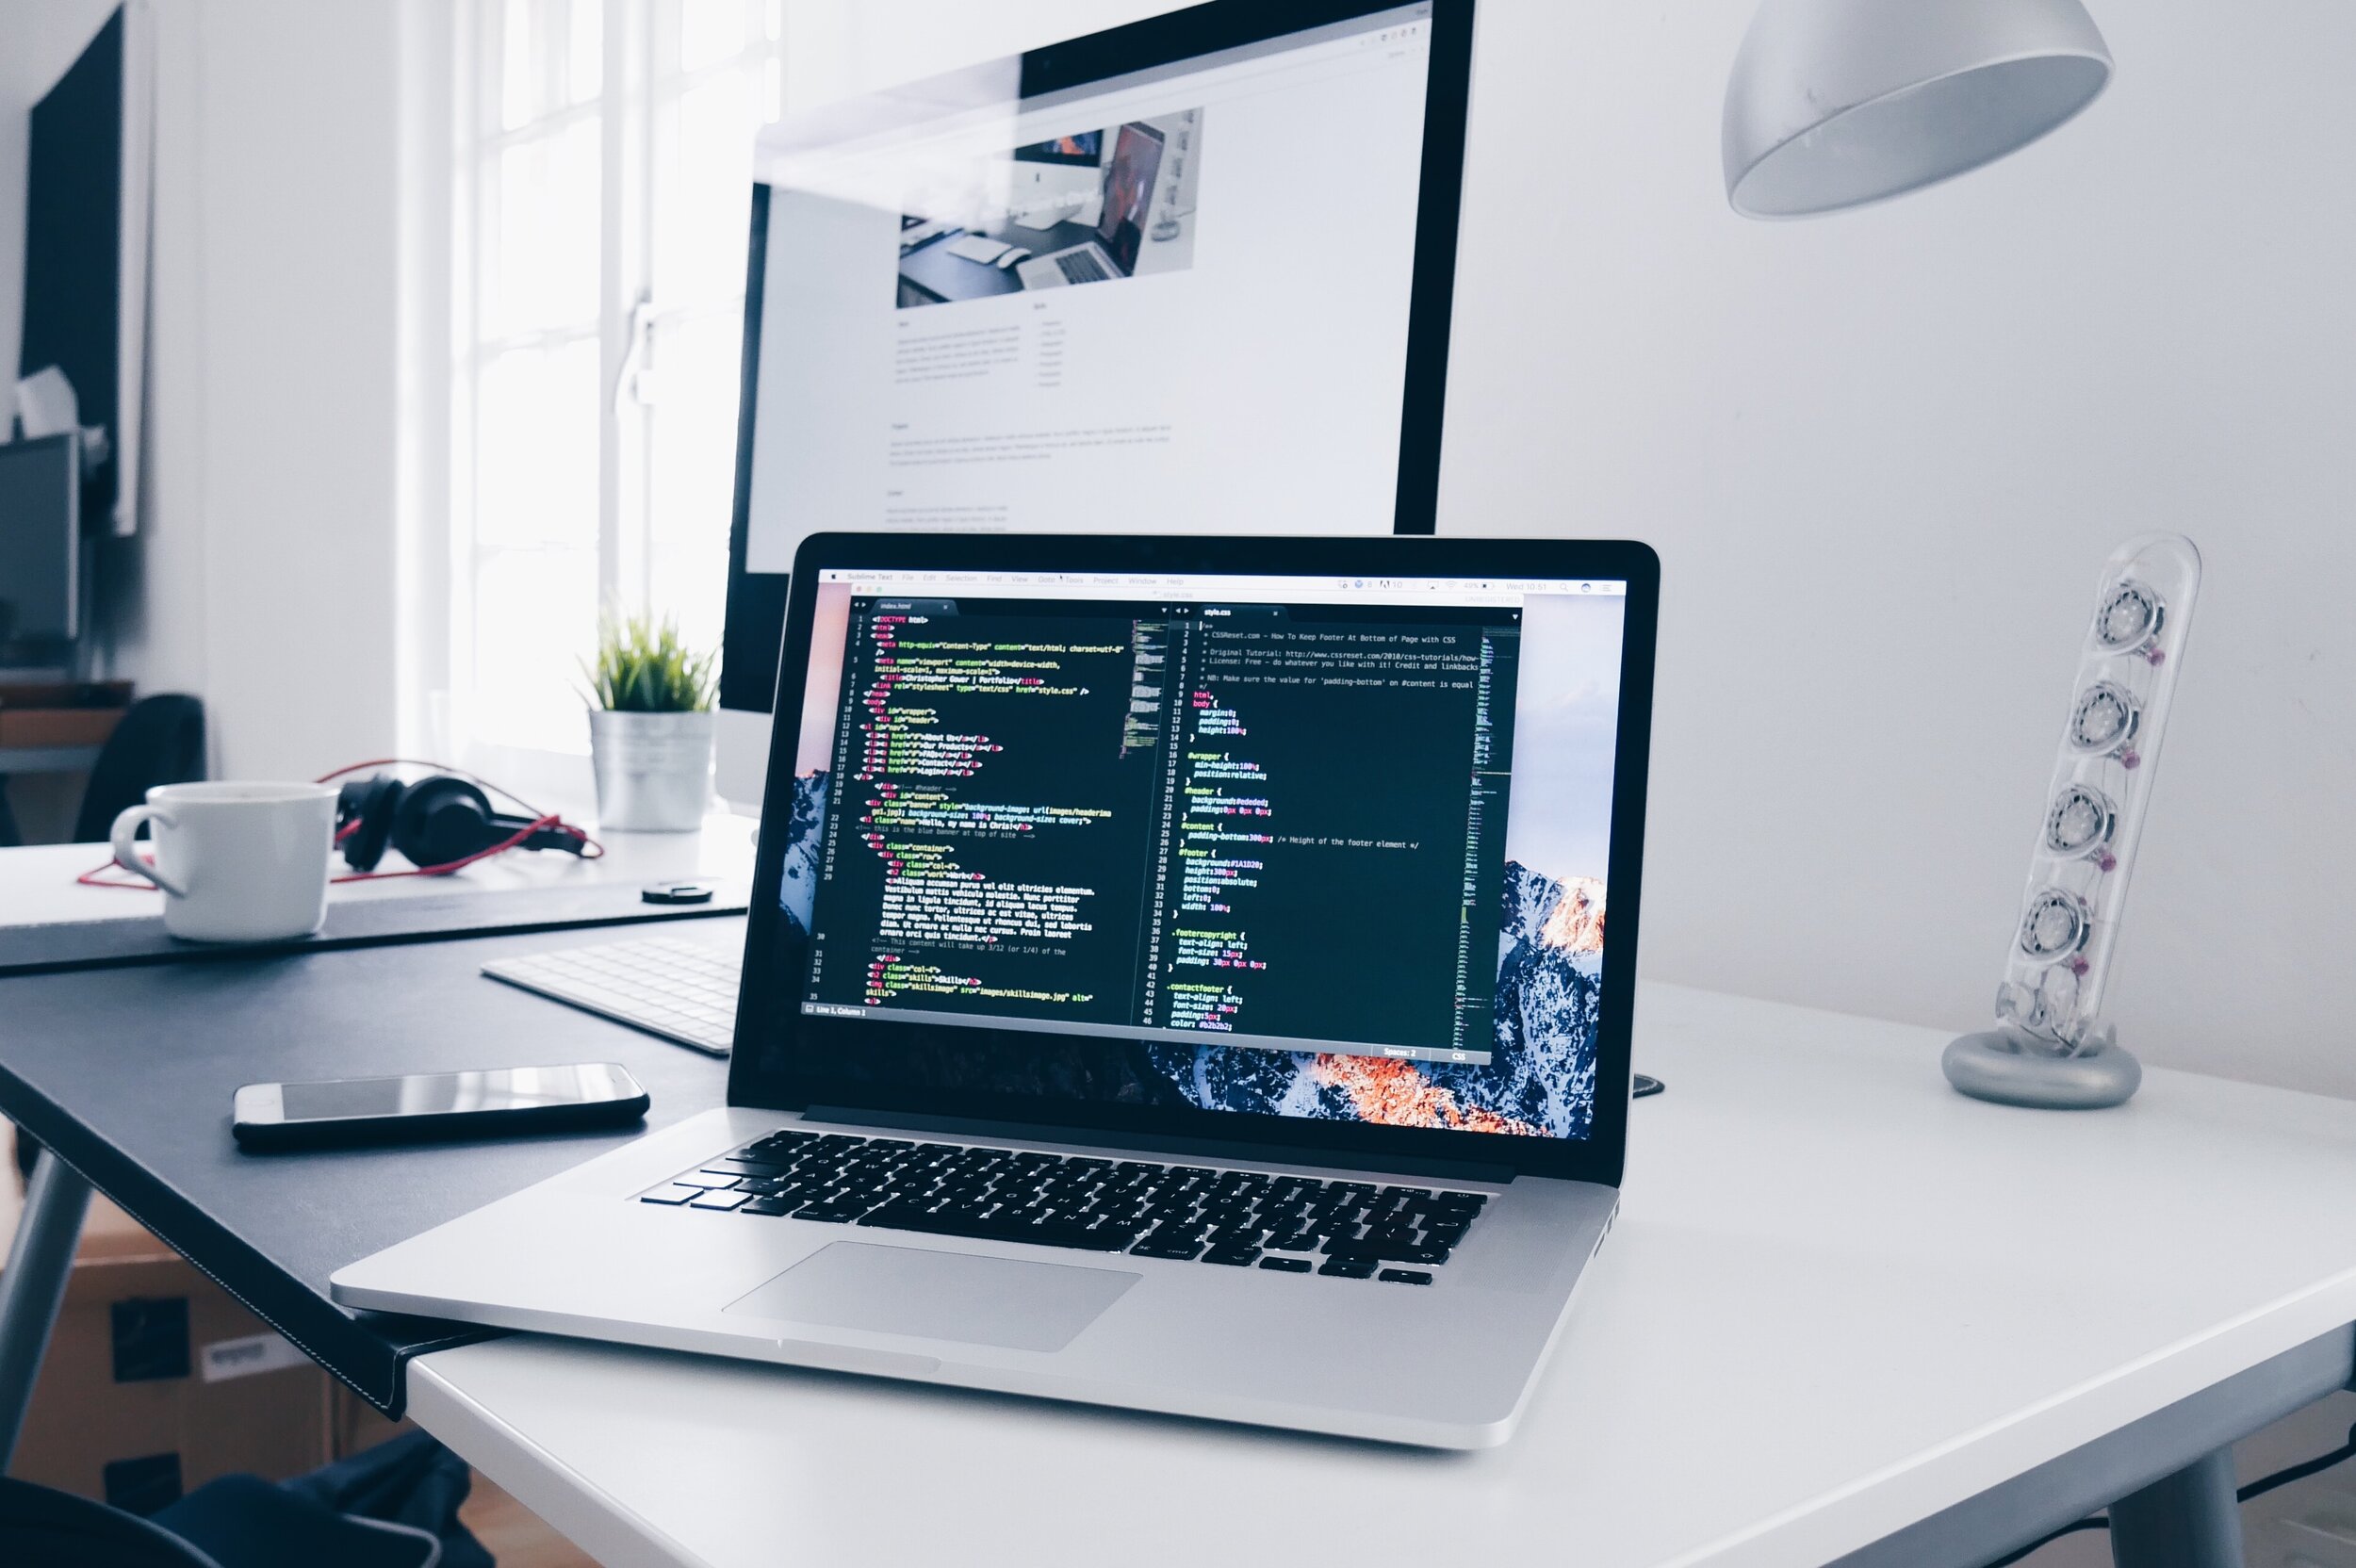 HERE ARE THE SKILLS YOU NEED TO BECOME A WEB APP DEVELOPER